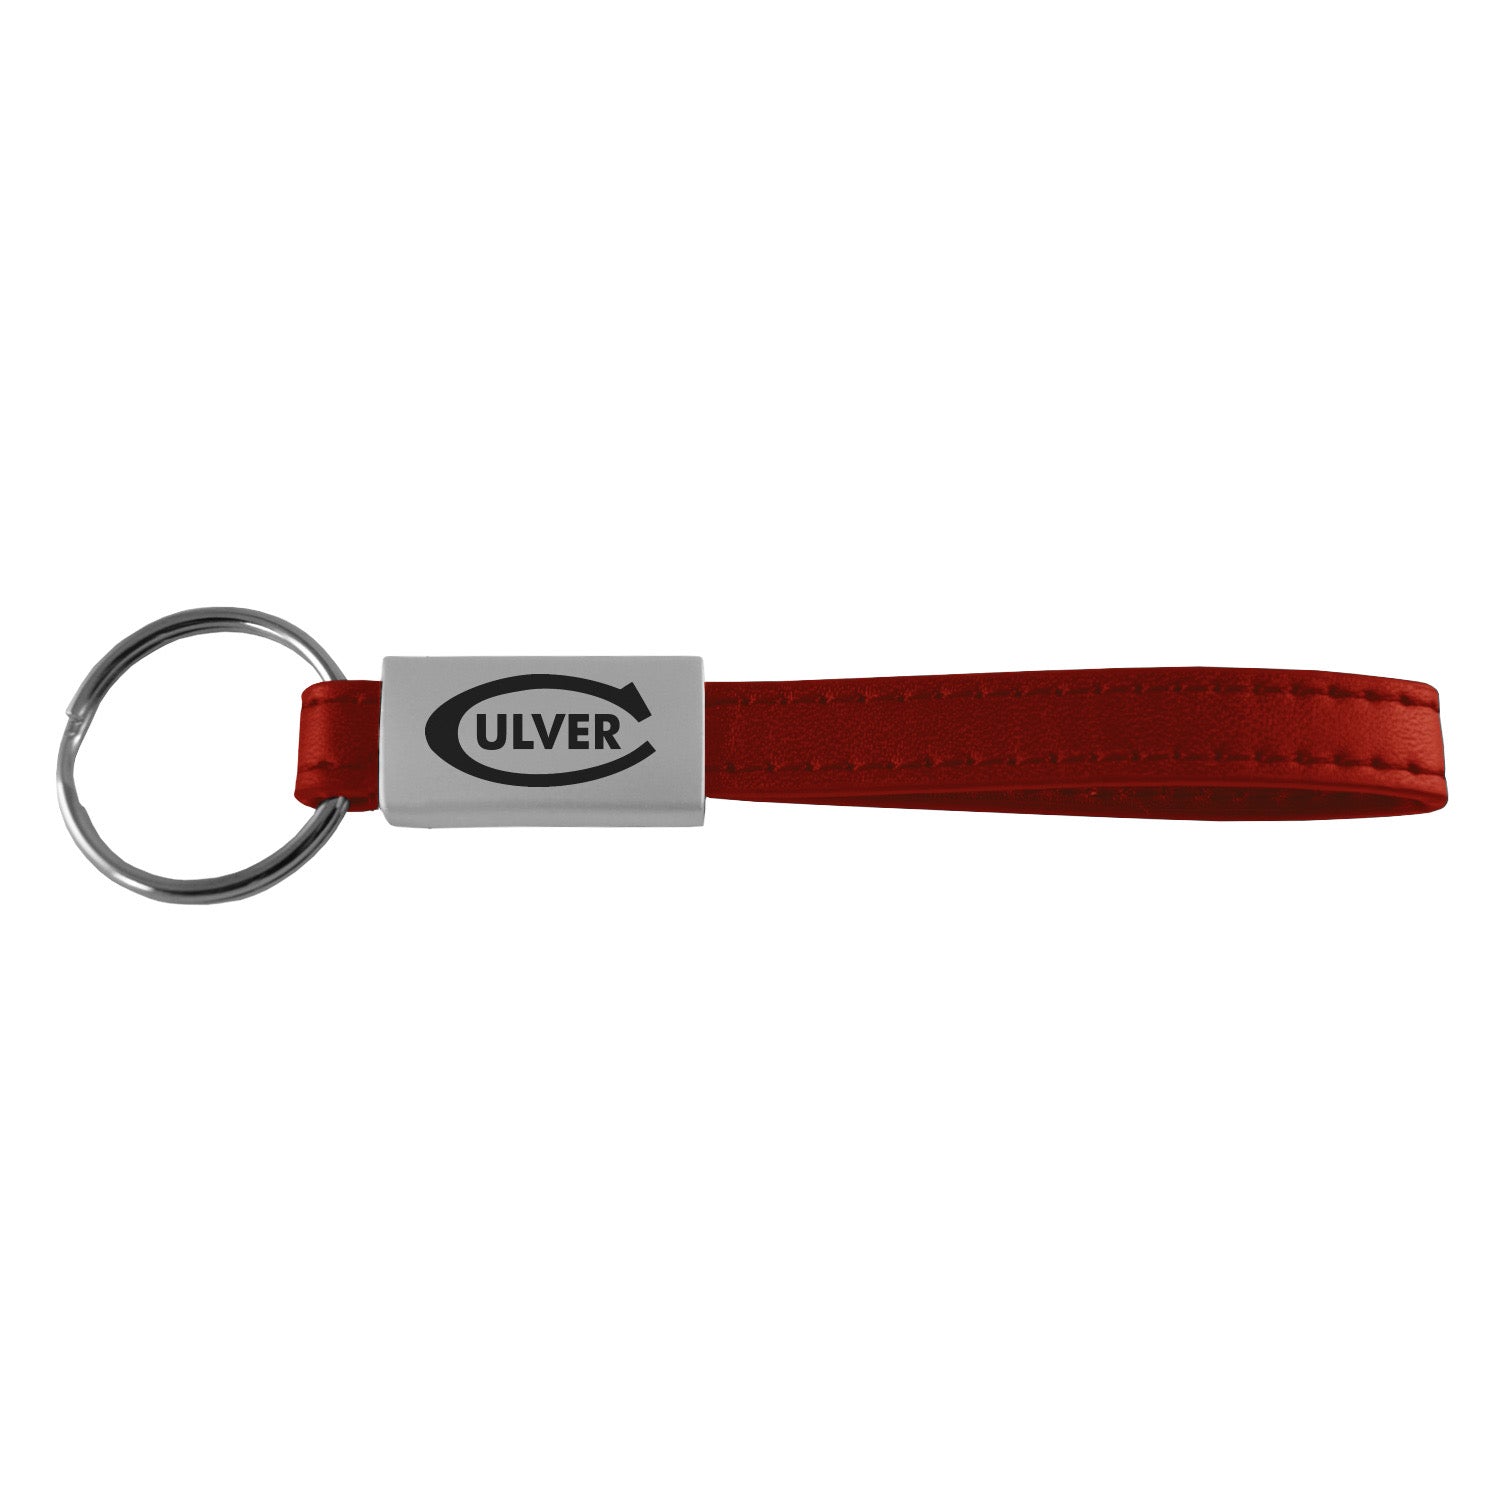 Culver Leather Strap Key Chain